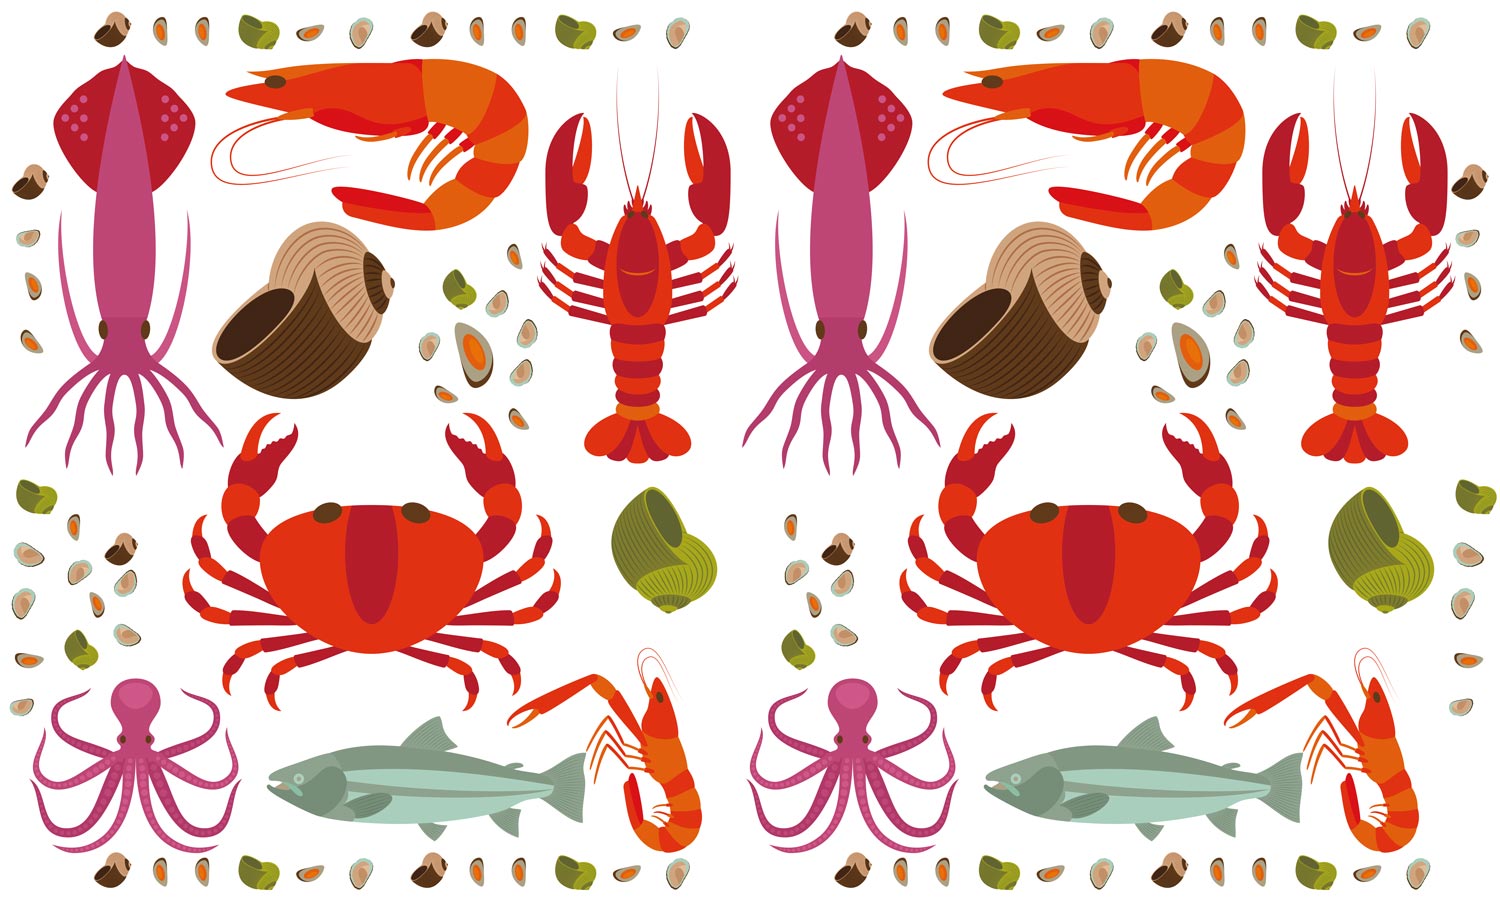 Wallpaper Mural with a Seafood Pattern to Adorn Your Home